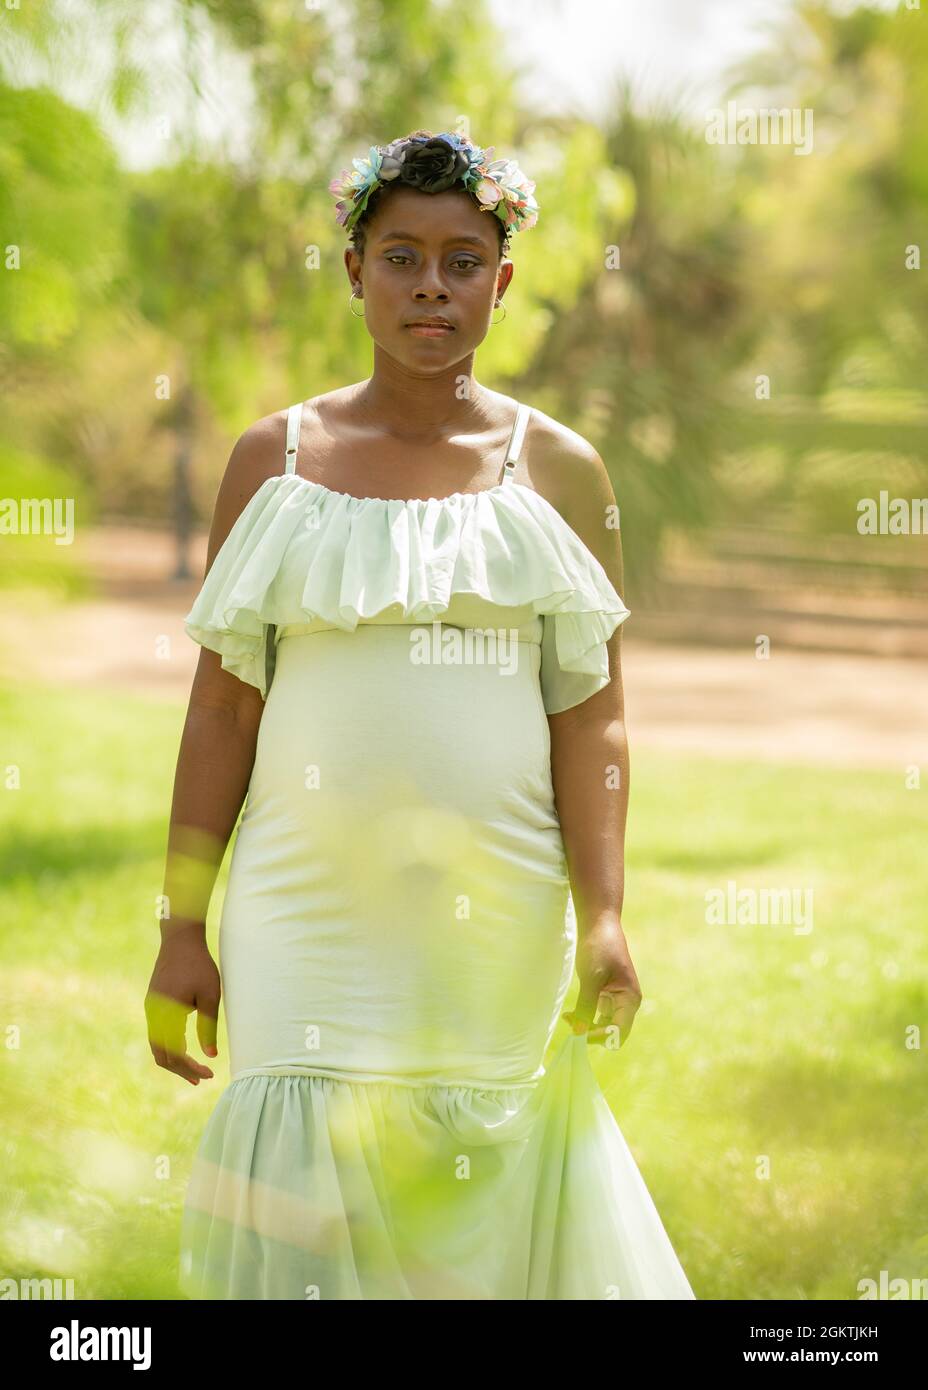 Pregnant African American woman in white dress Stock Photo